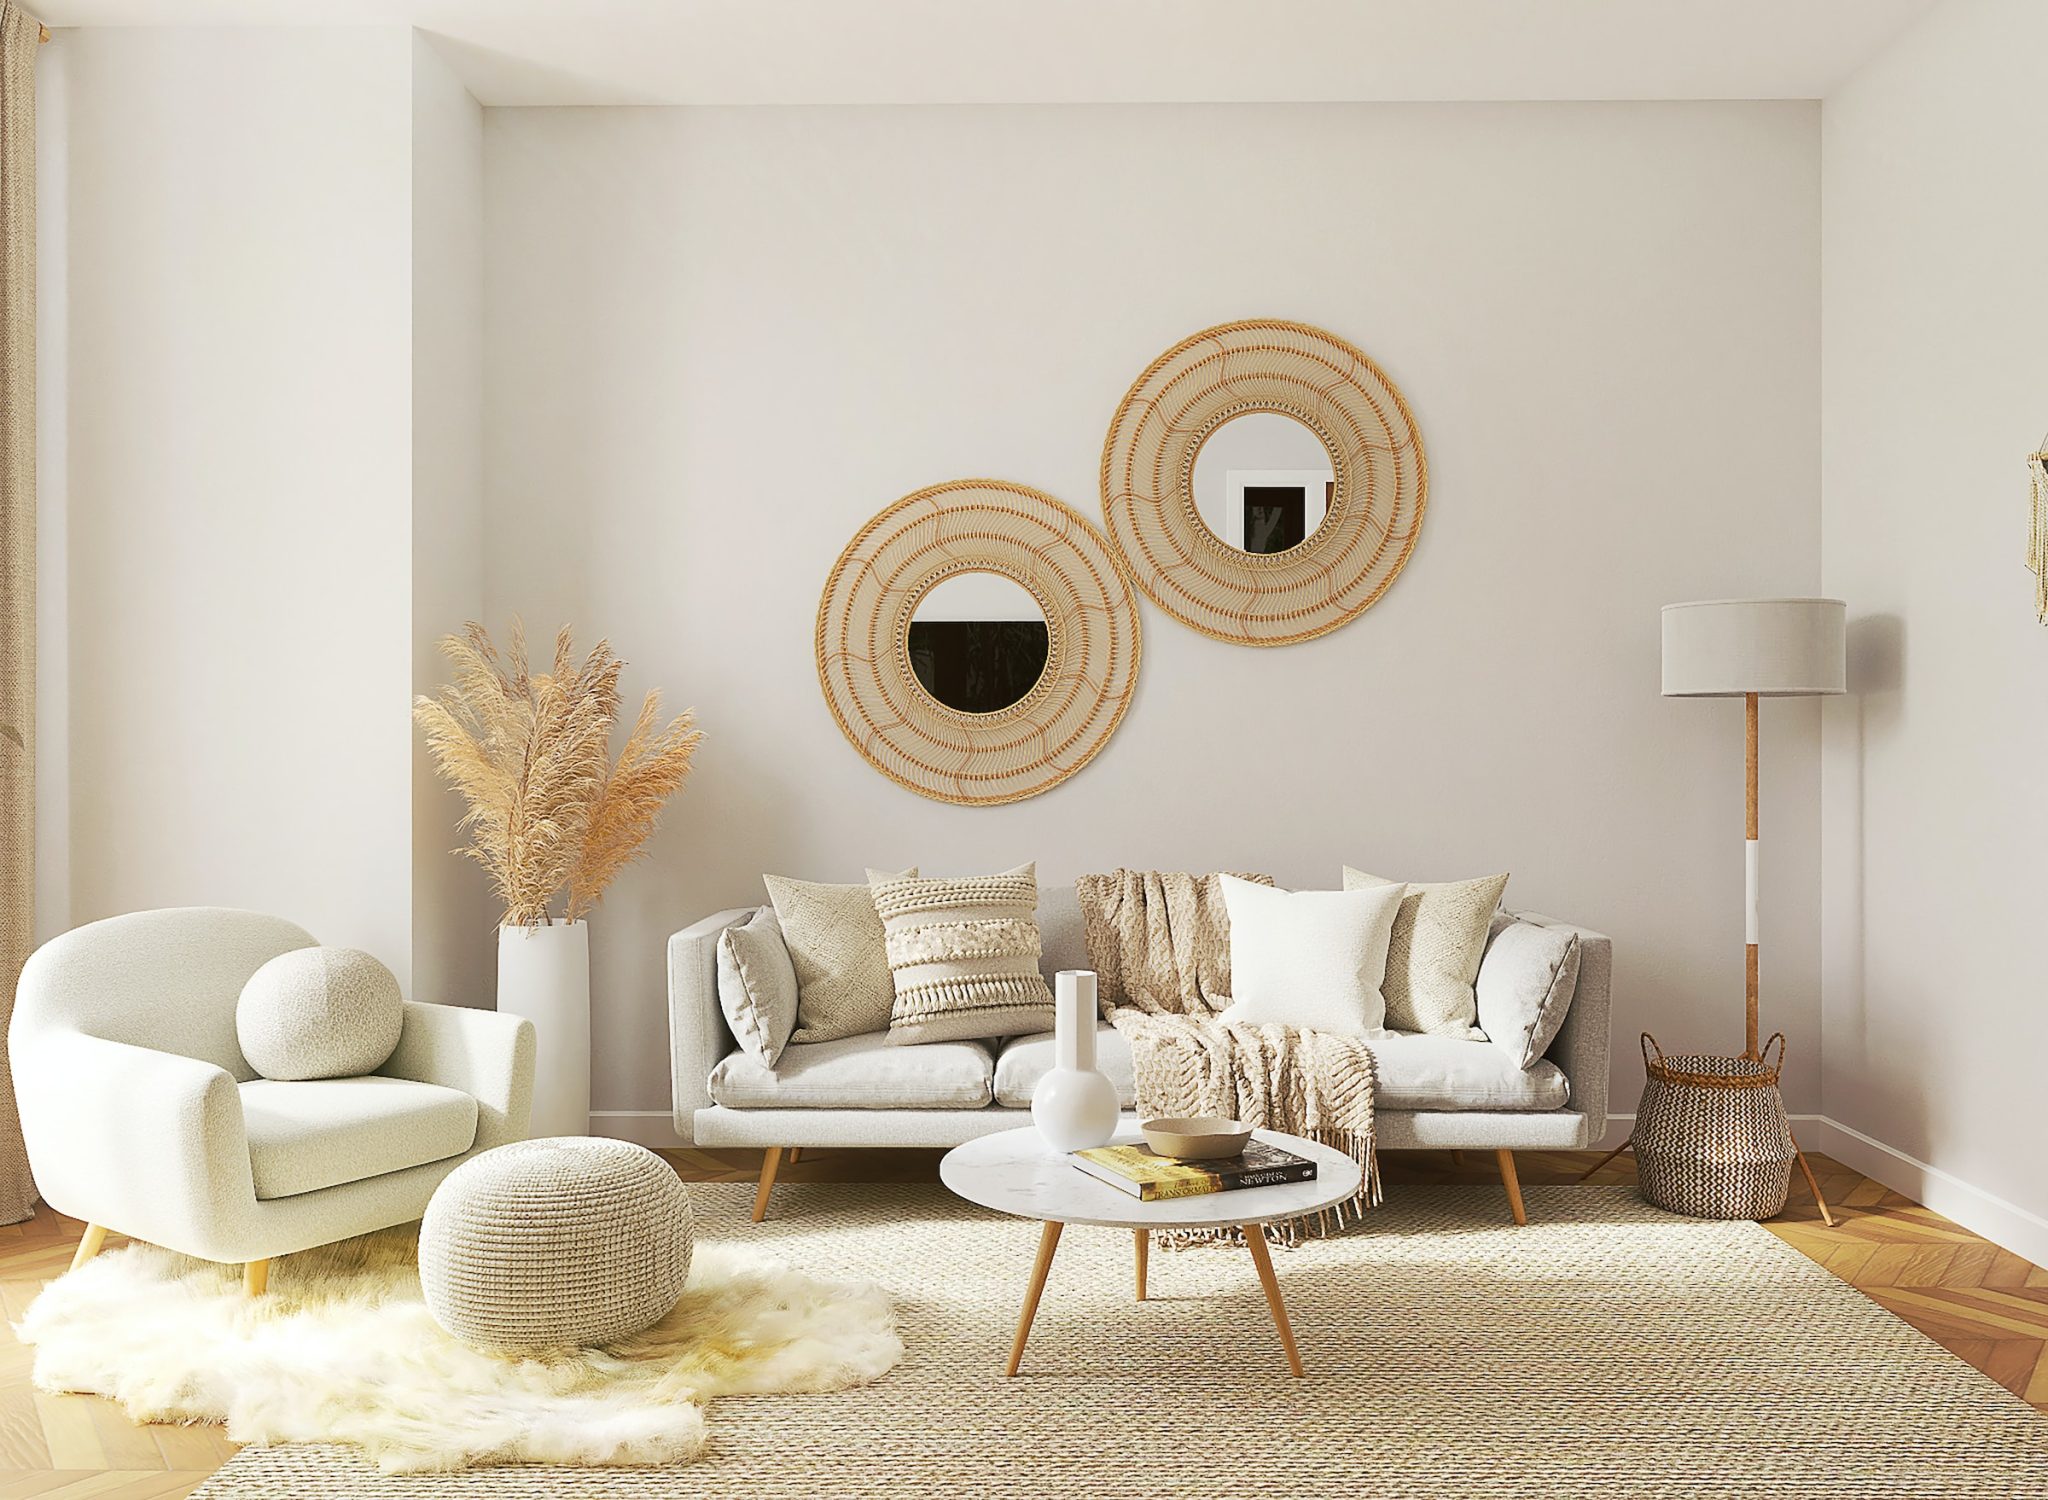 How to create a functional and stylish living room: a guide